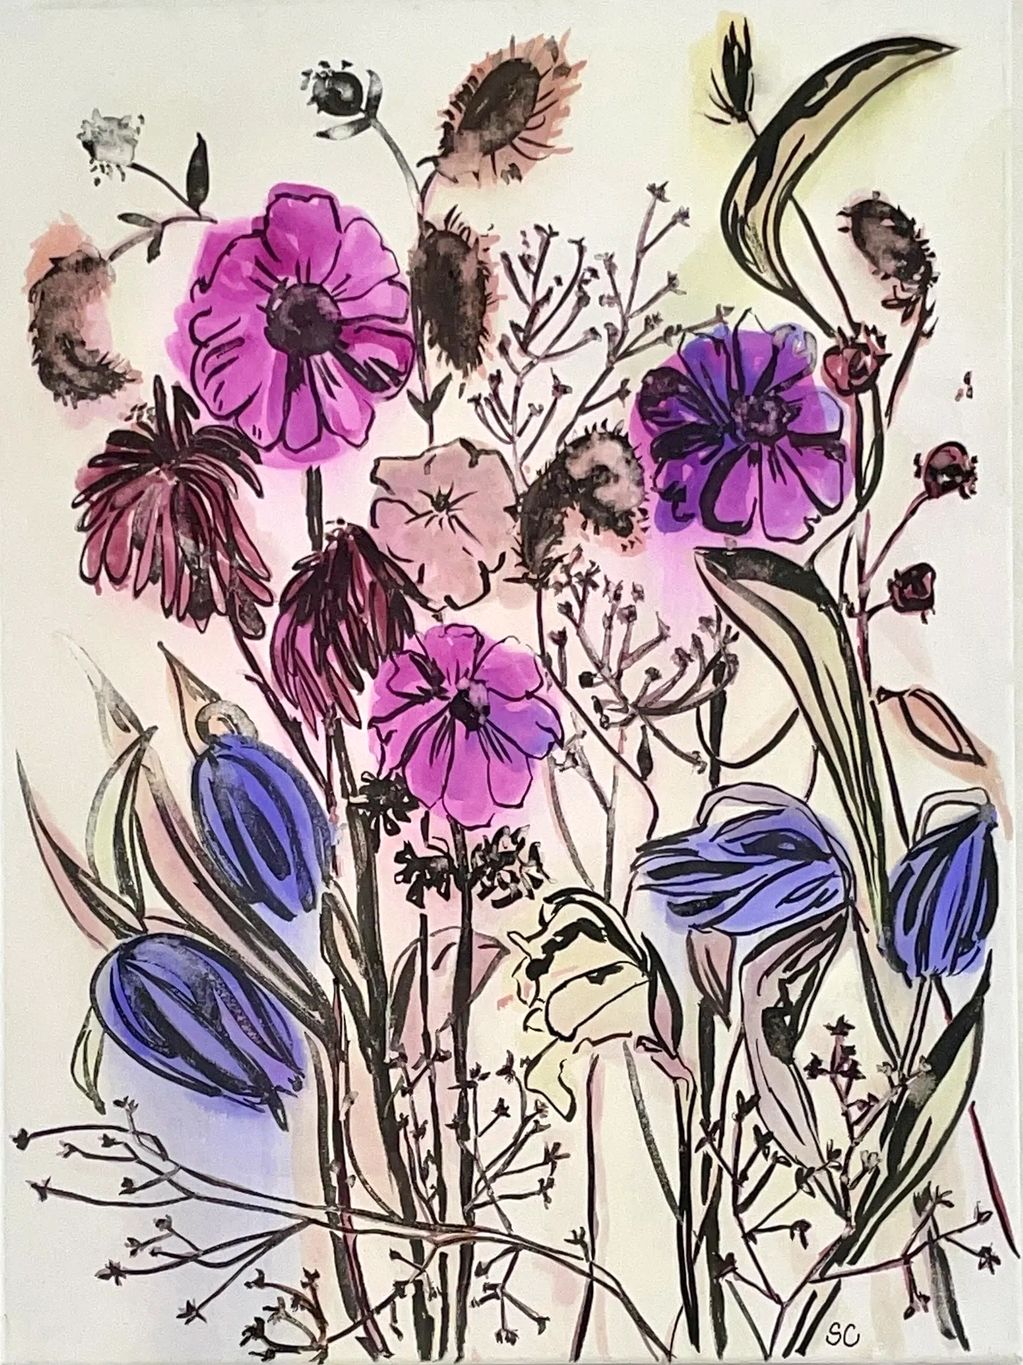 Poppy, Buddelia, Iron Weed, Asclepia 
with Ink
watercolor, graphite and ink on canvas
18" x 24"
Cont